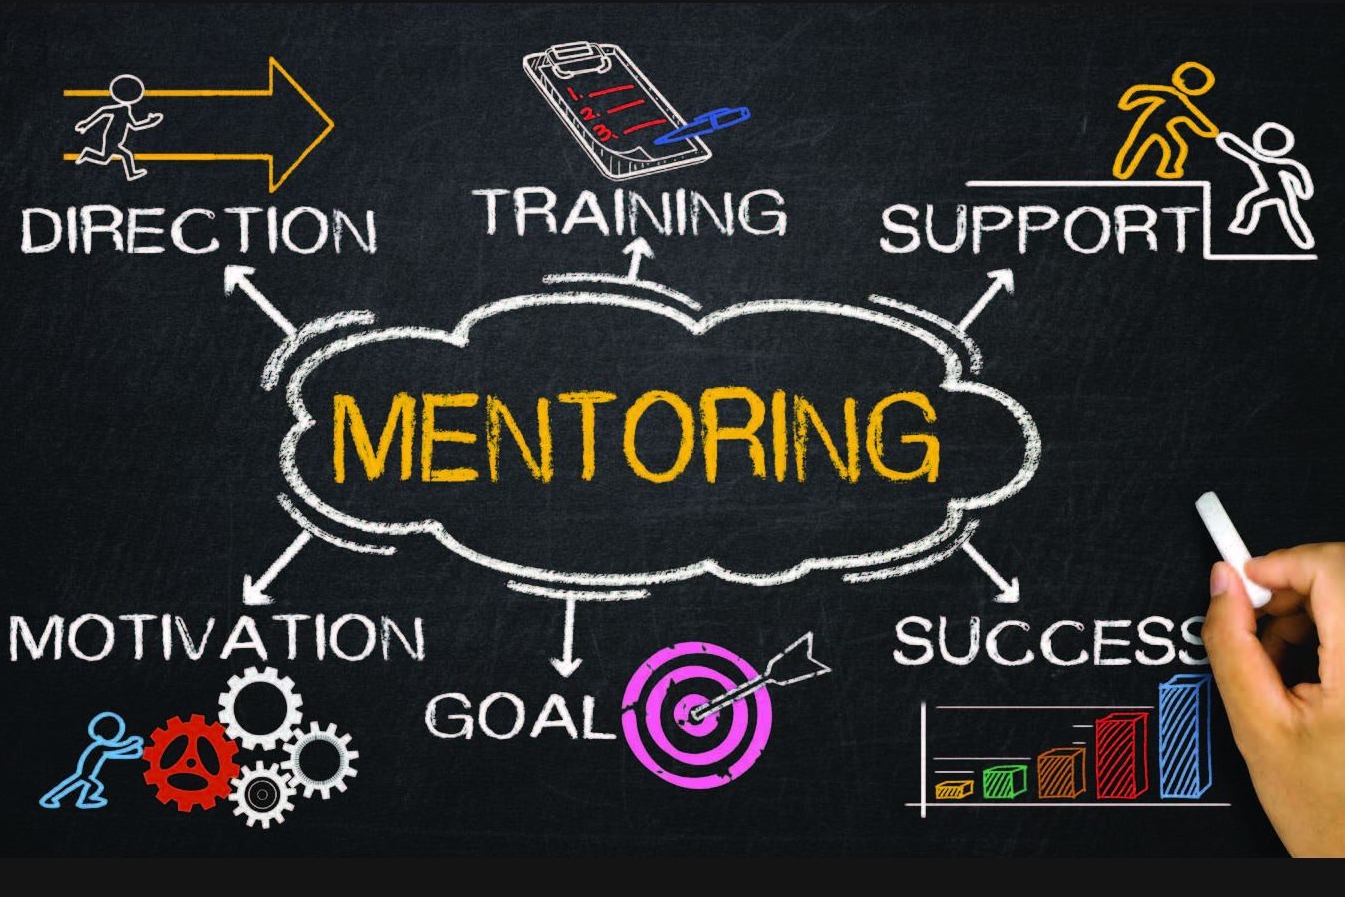 Cloud with "Mentoring" written in it with direction, training, support, motivation, goal, and success branching from it